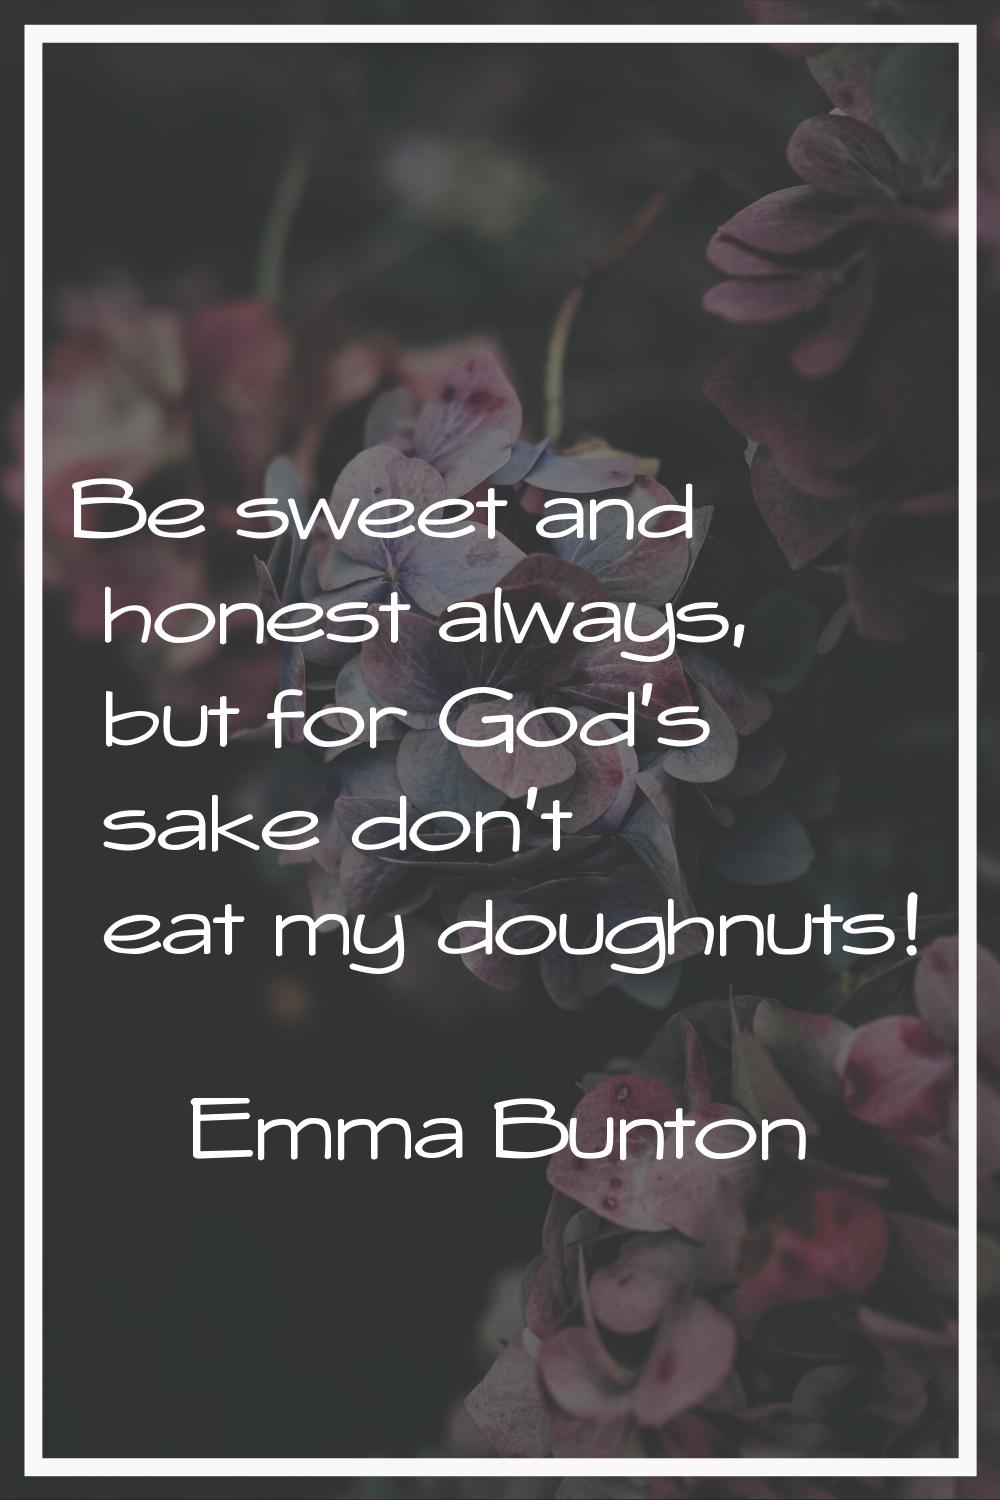 Be sweet and honest always, but for God's sake don't eat my doughnuts!